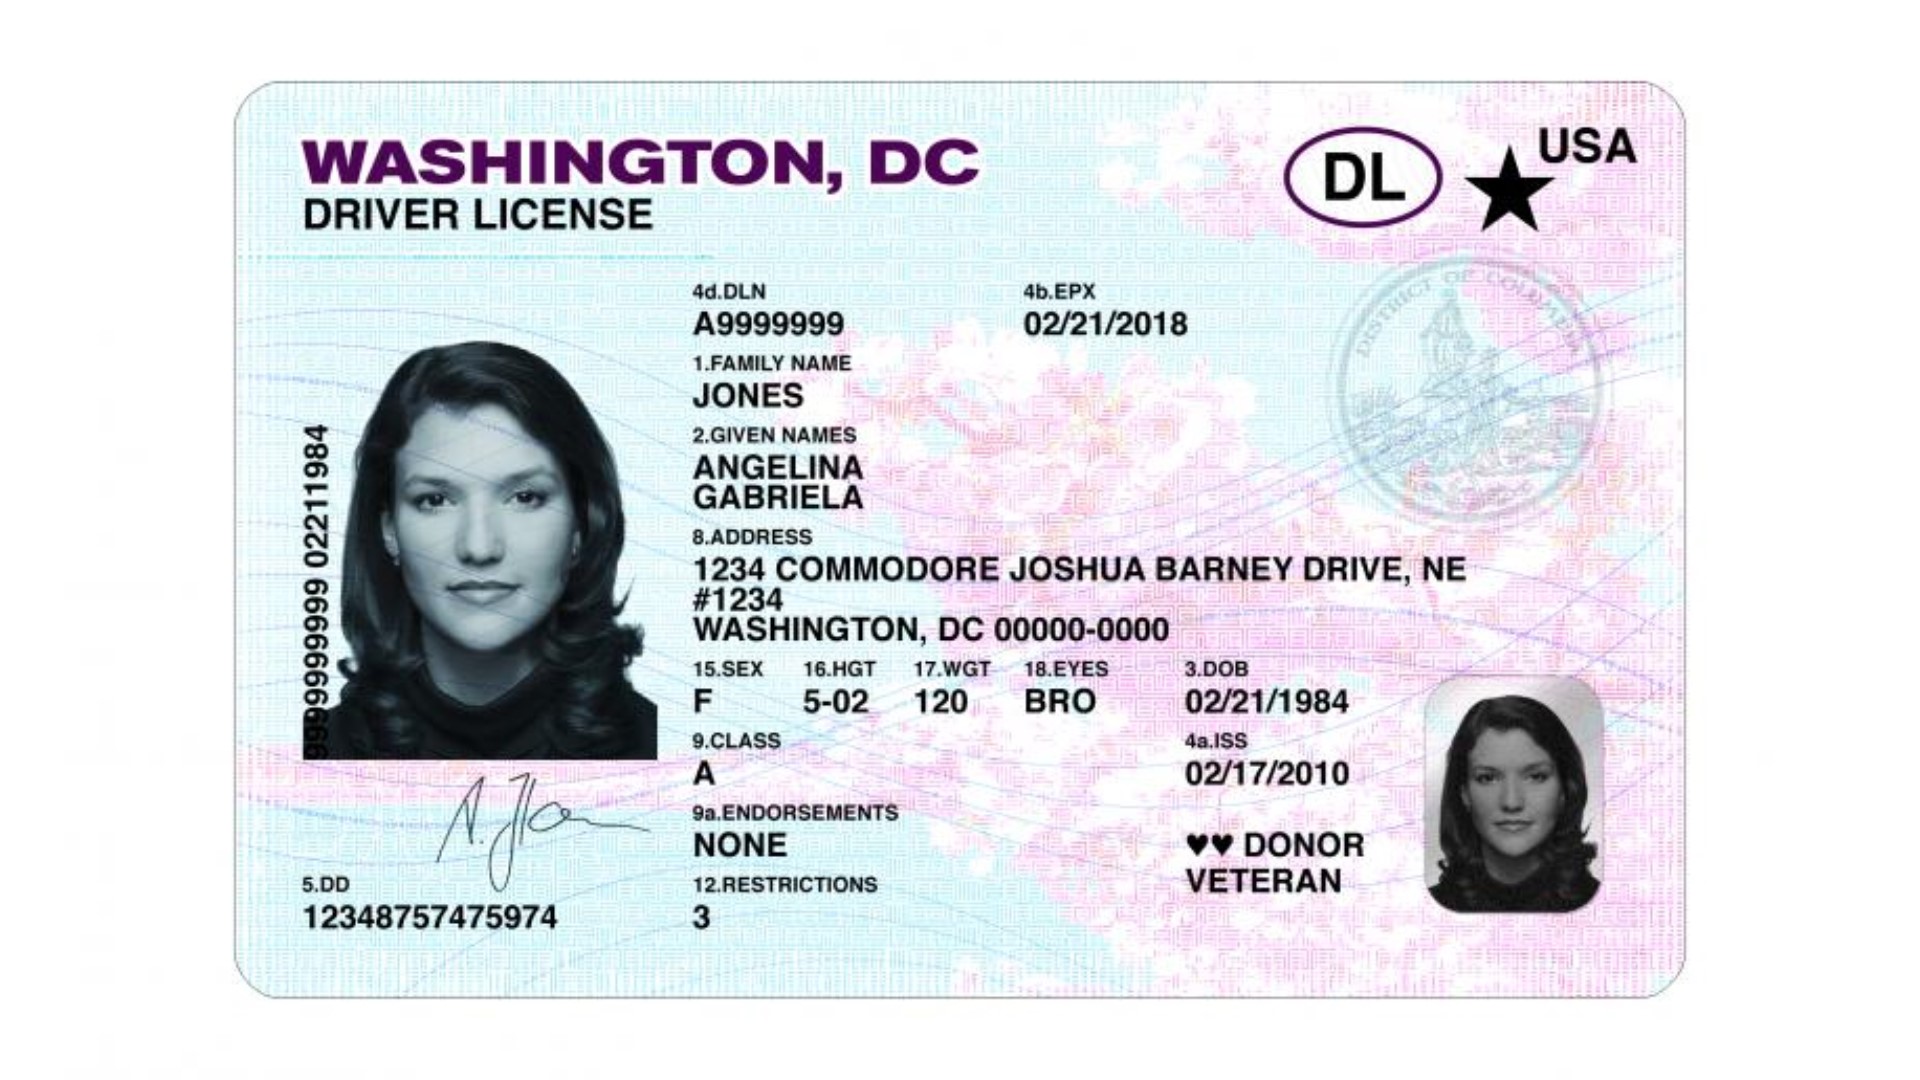 are-there-options-in-the-dmv-for-people-who-don-t-want-a-real-id